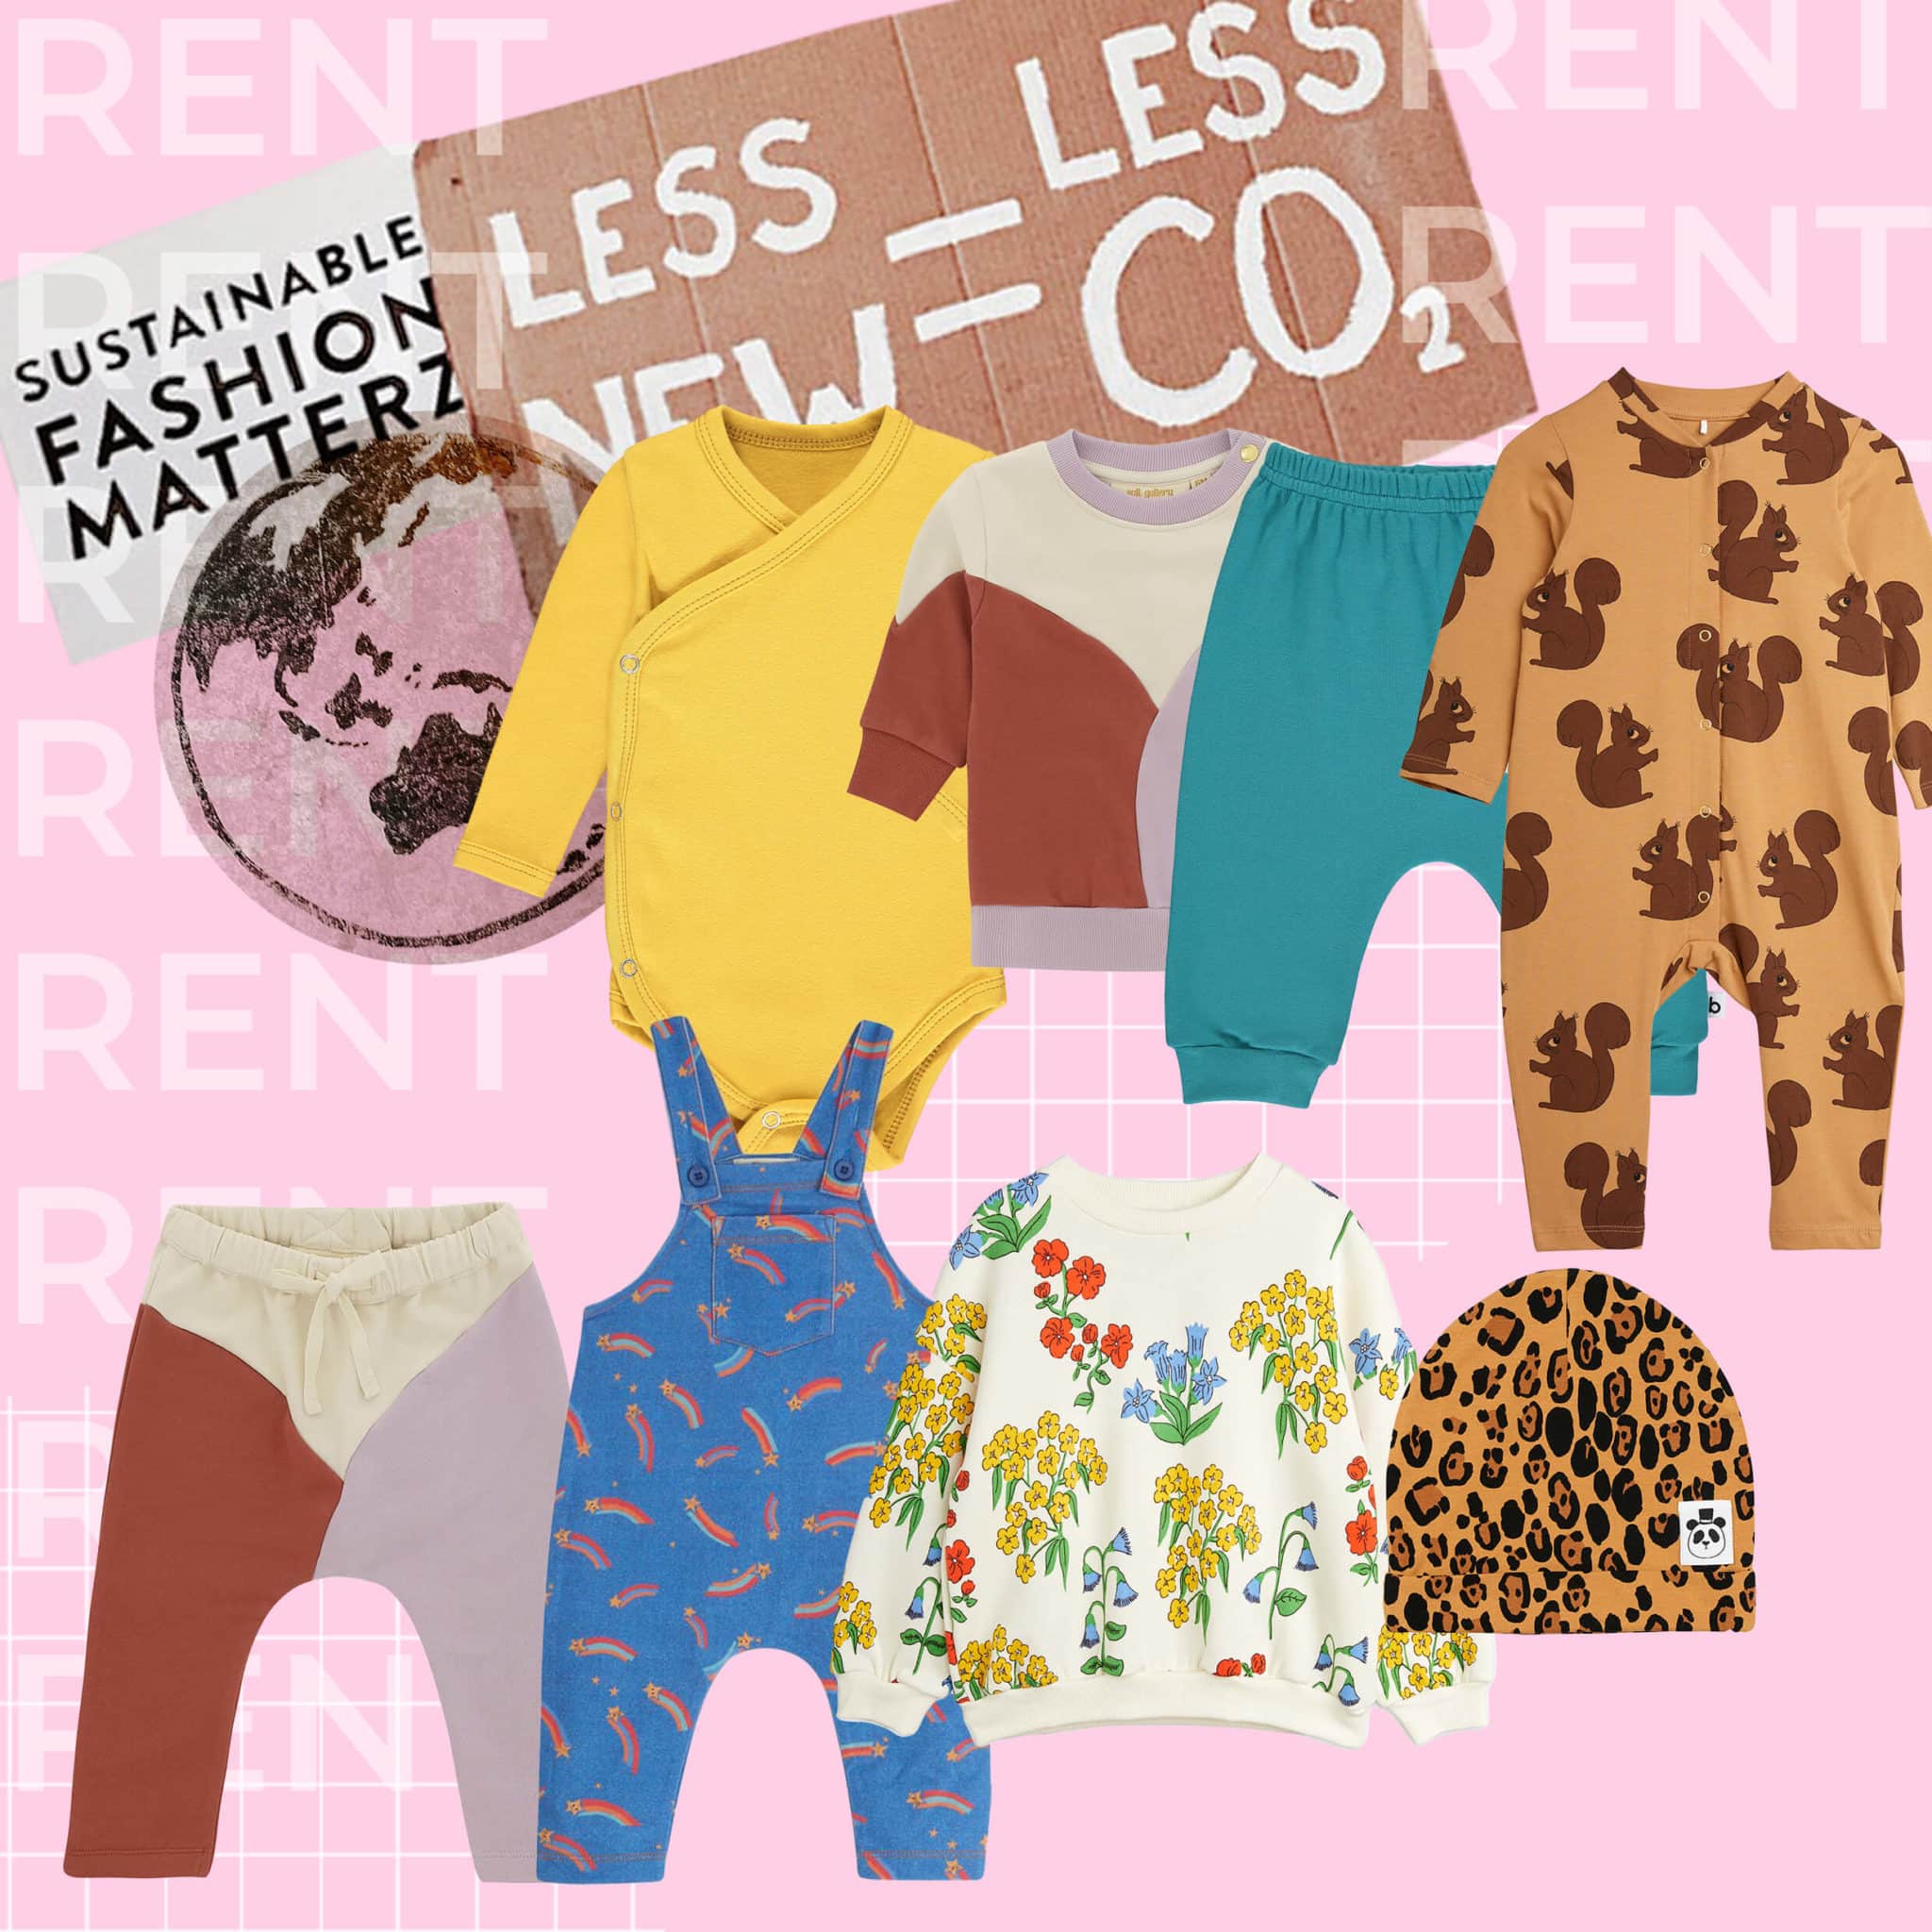 7 Reasons Why We Should be Renting our Children’s Wardrobes